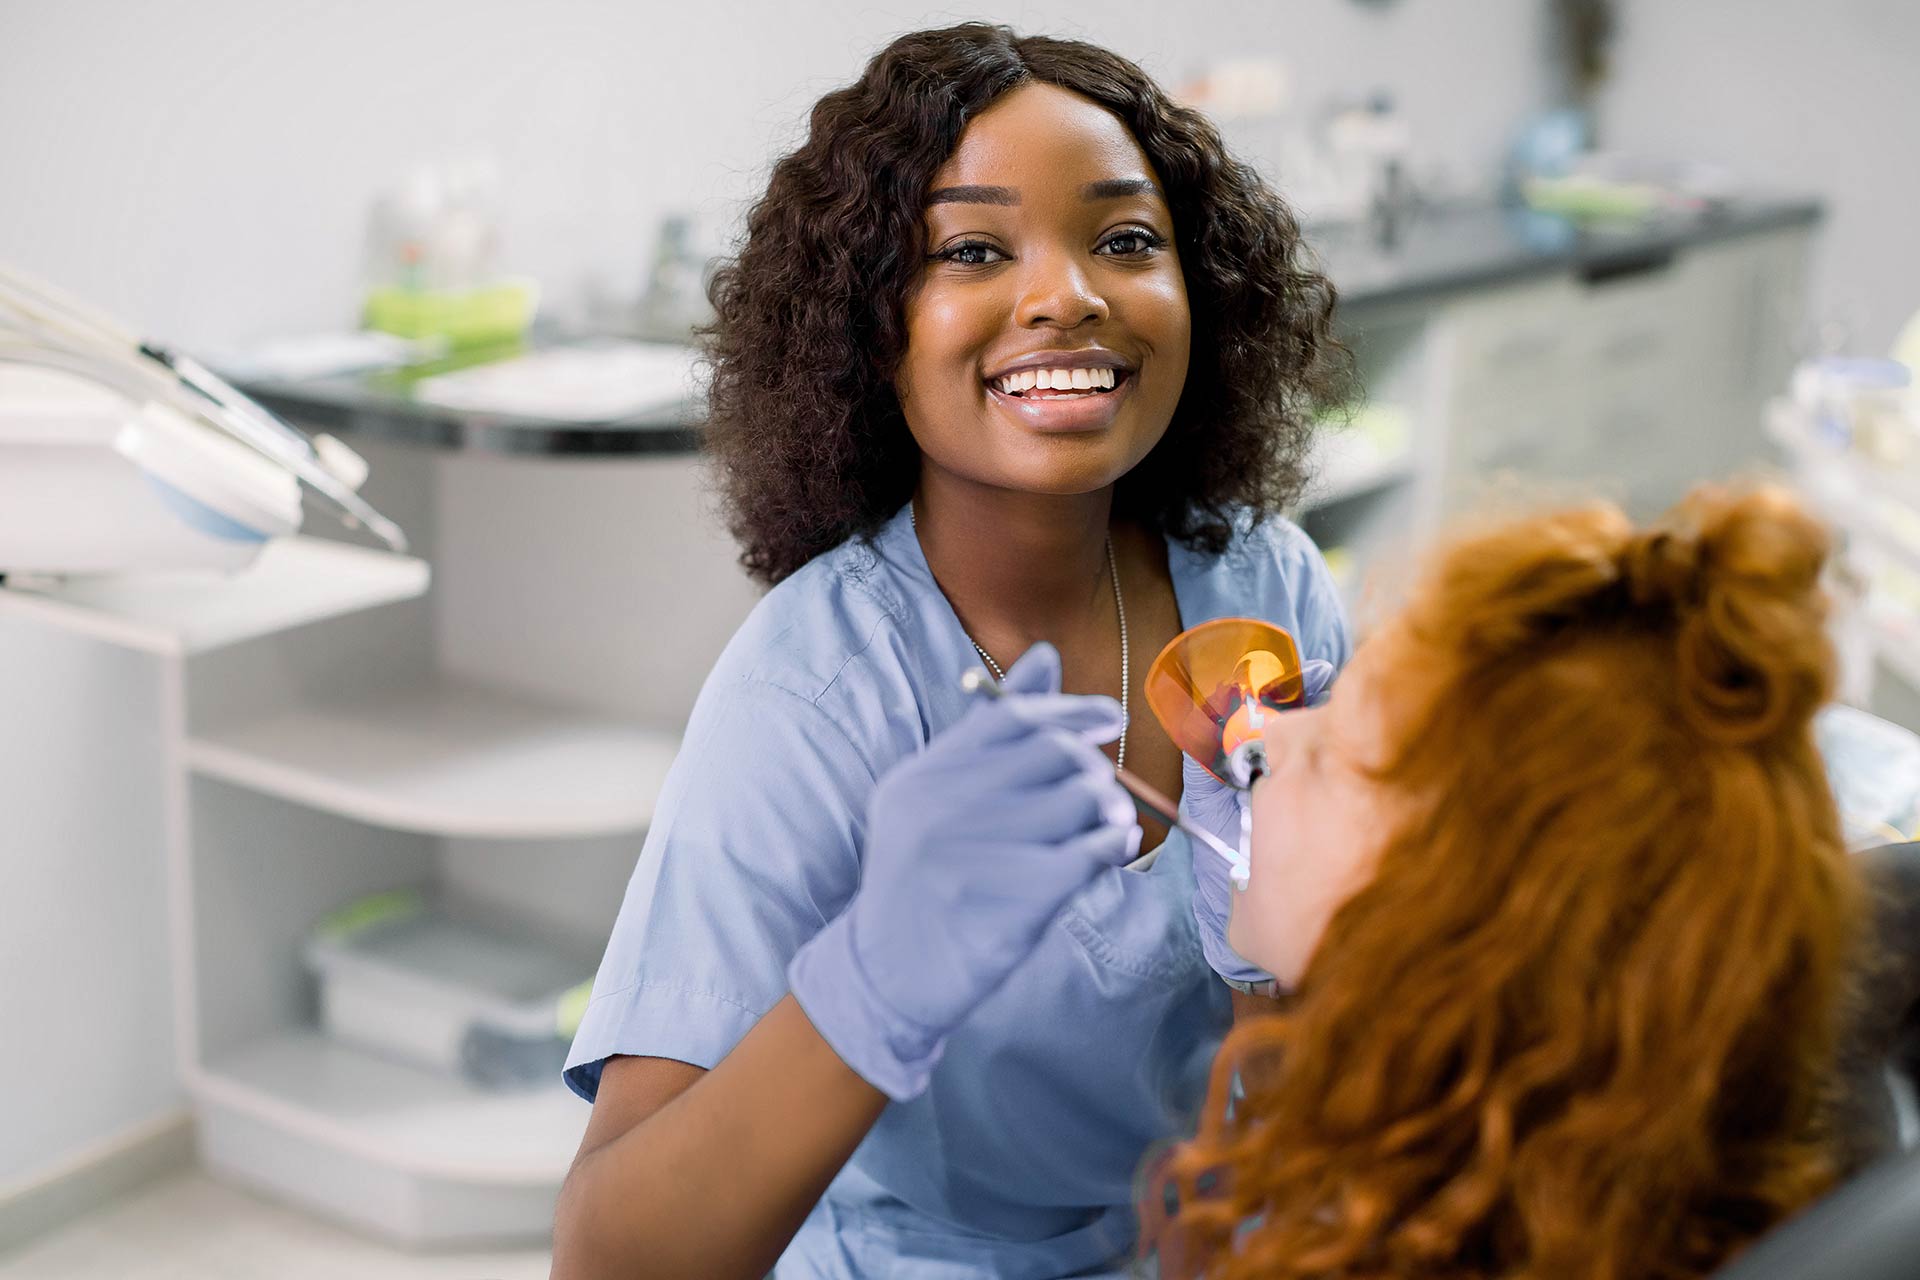 The 8 Skills of an Excellent Dental Assistant, According To Dentists